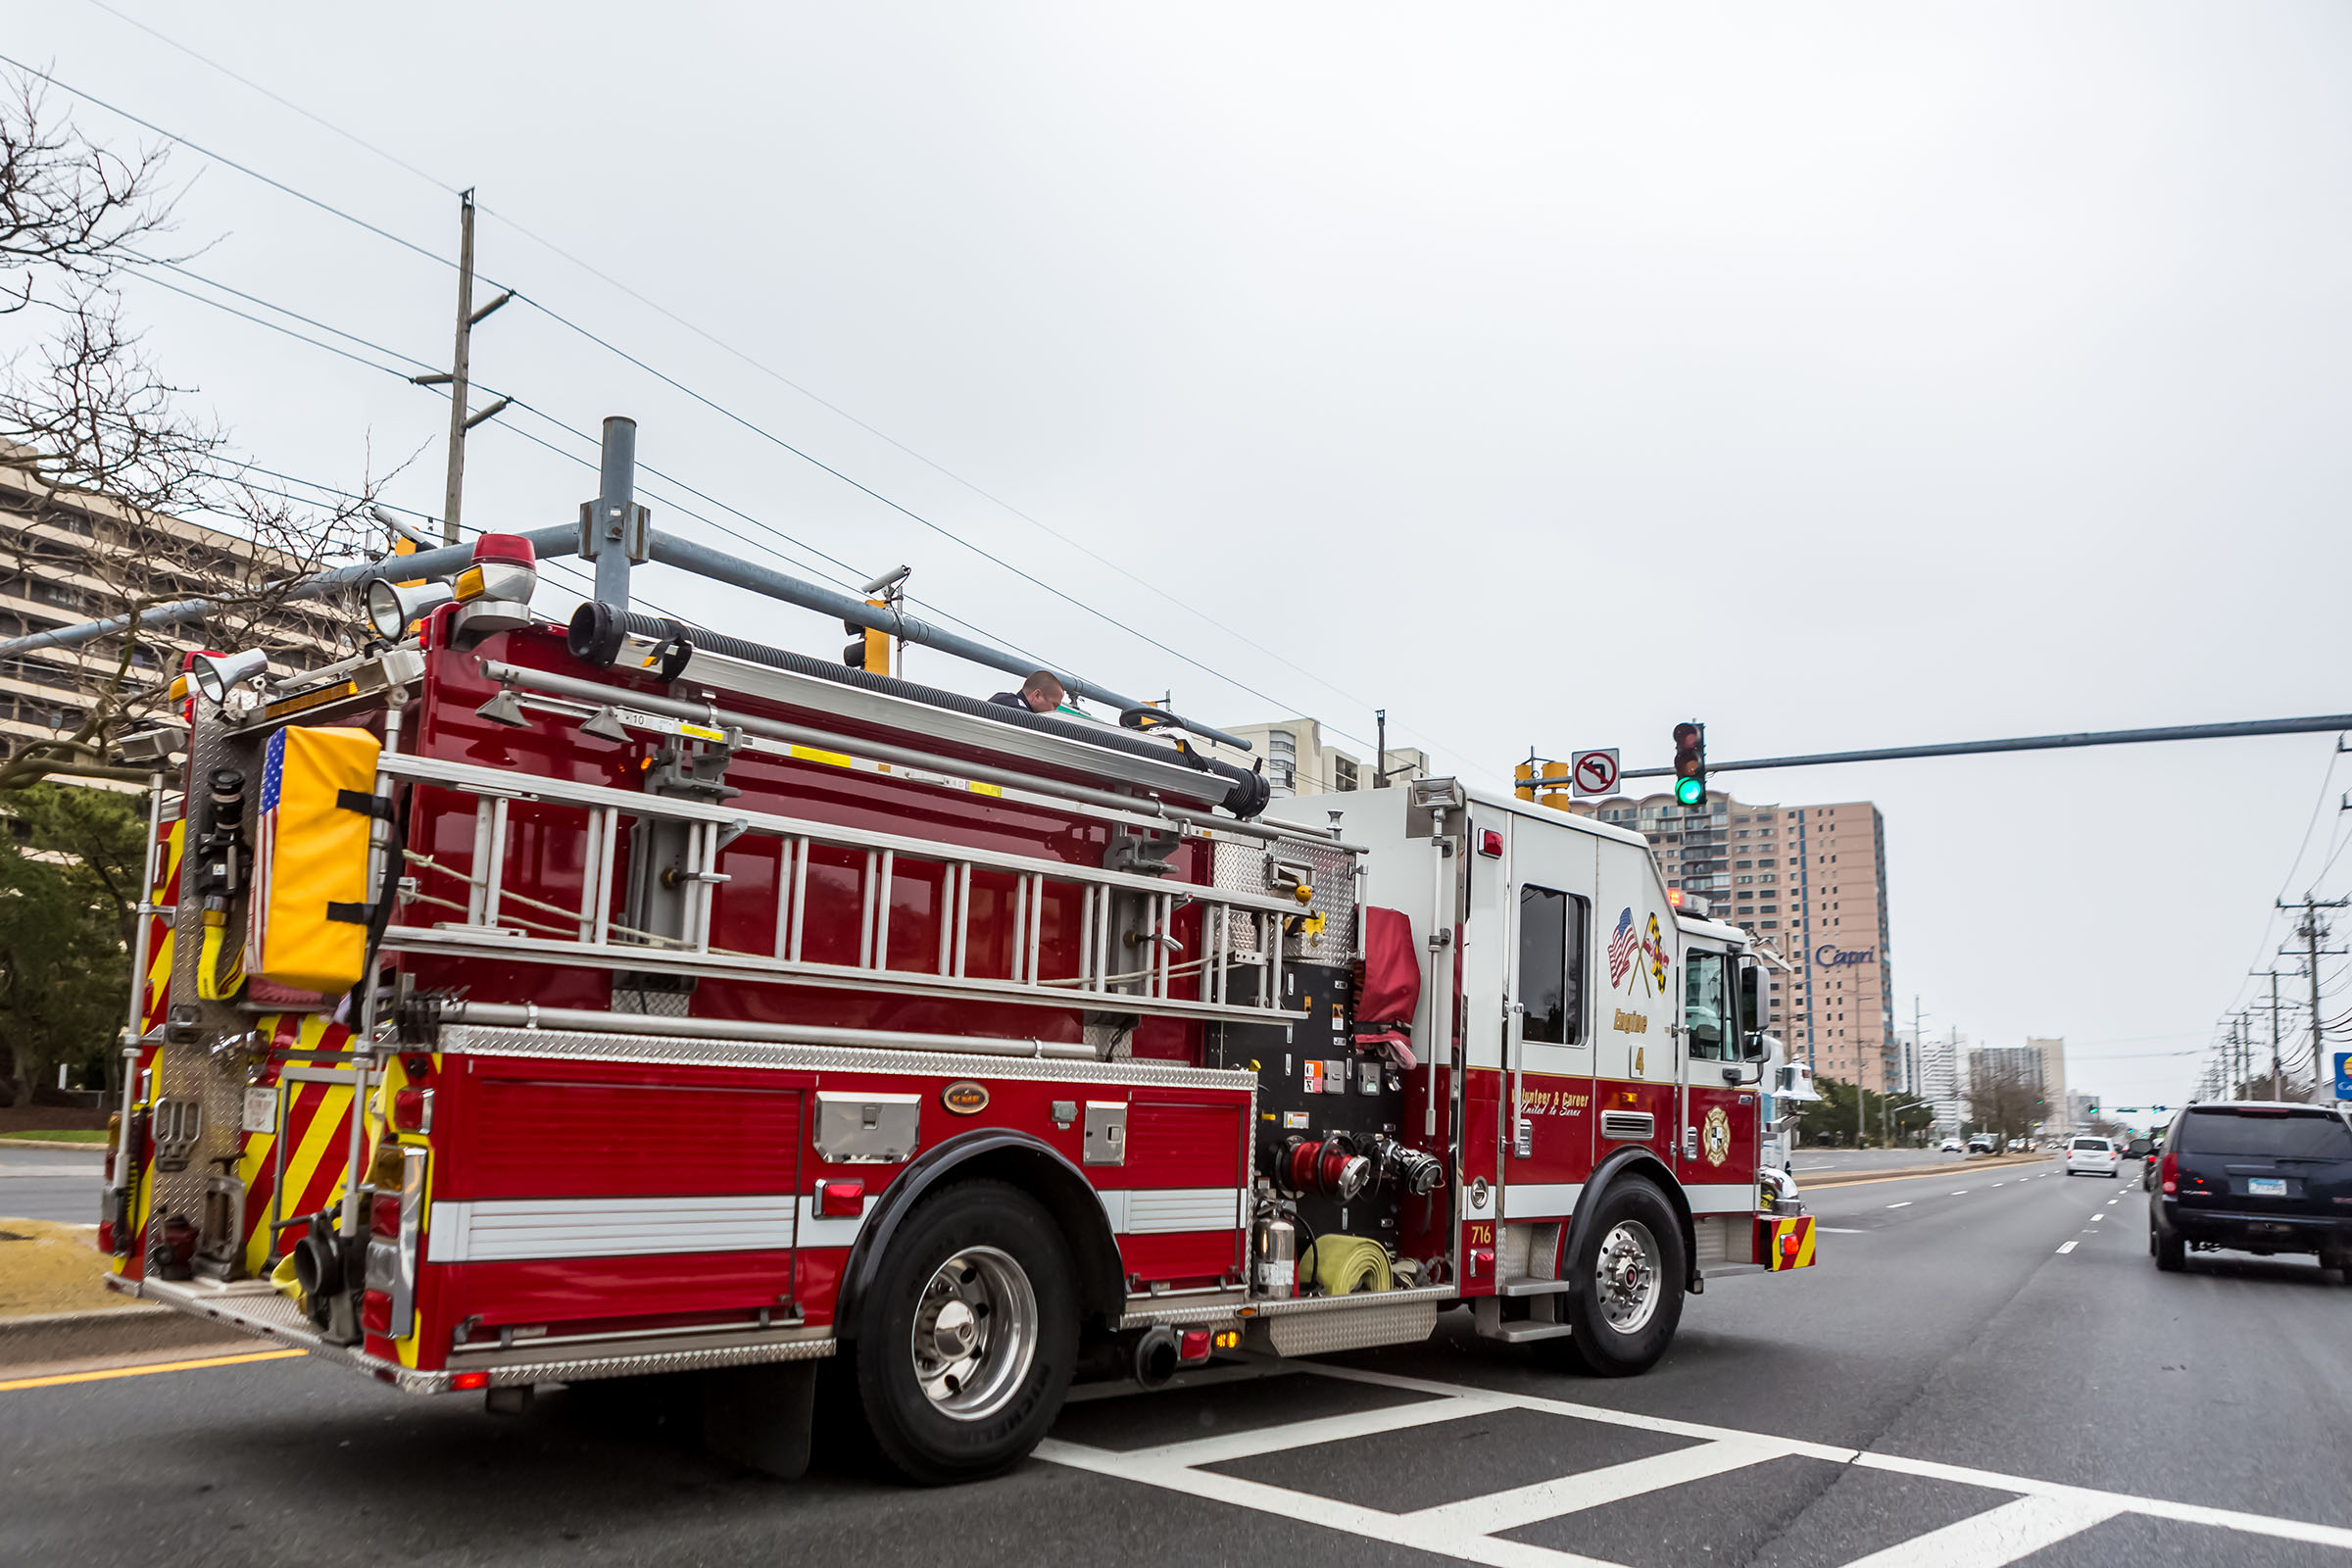 Ocean City Council approves the purchase of a fire truck for $1.9 million